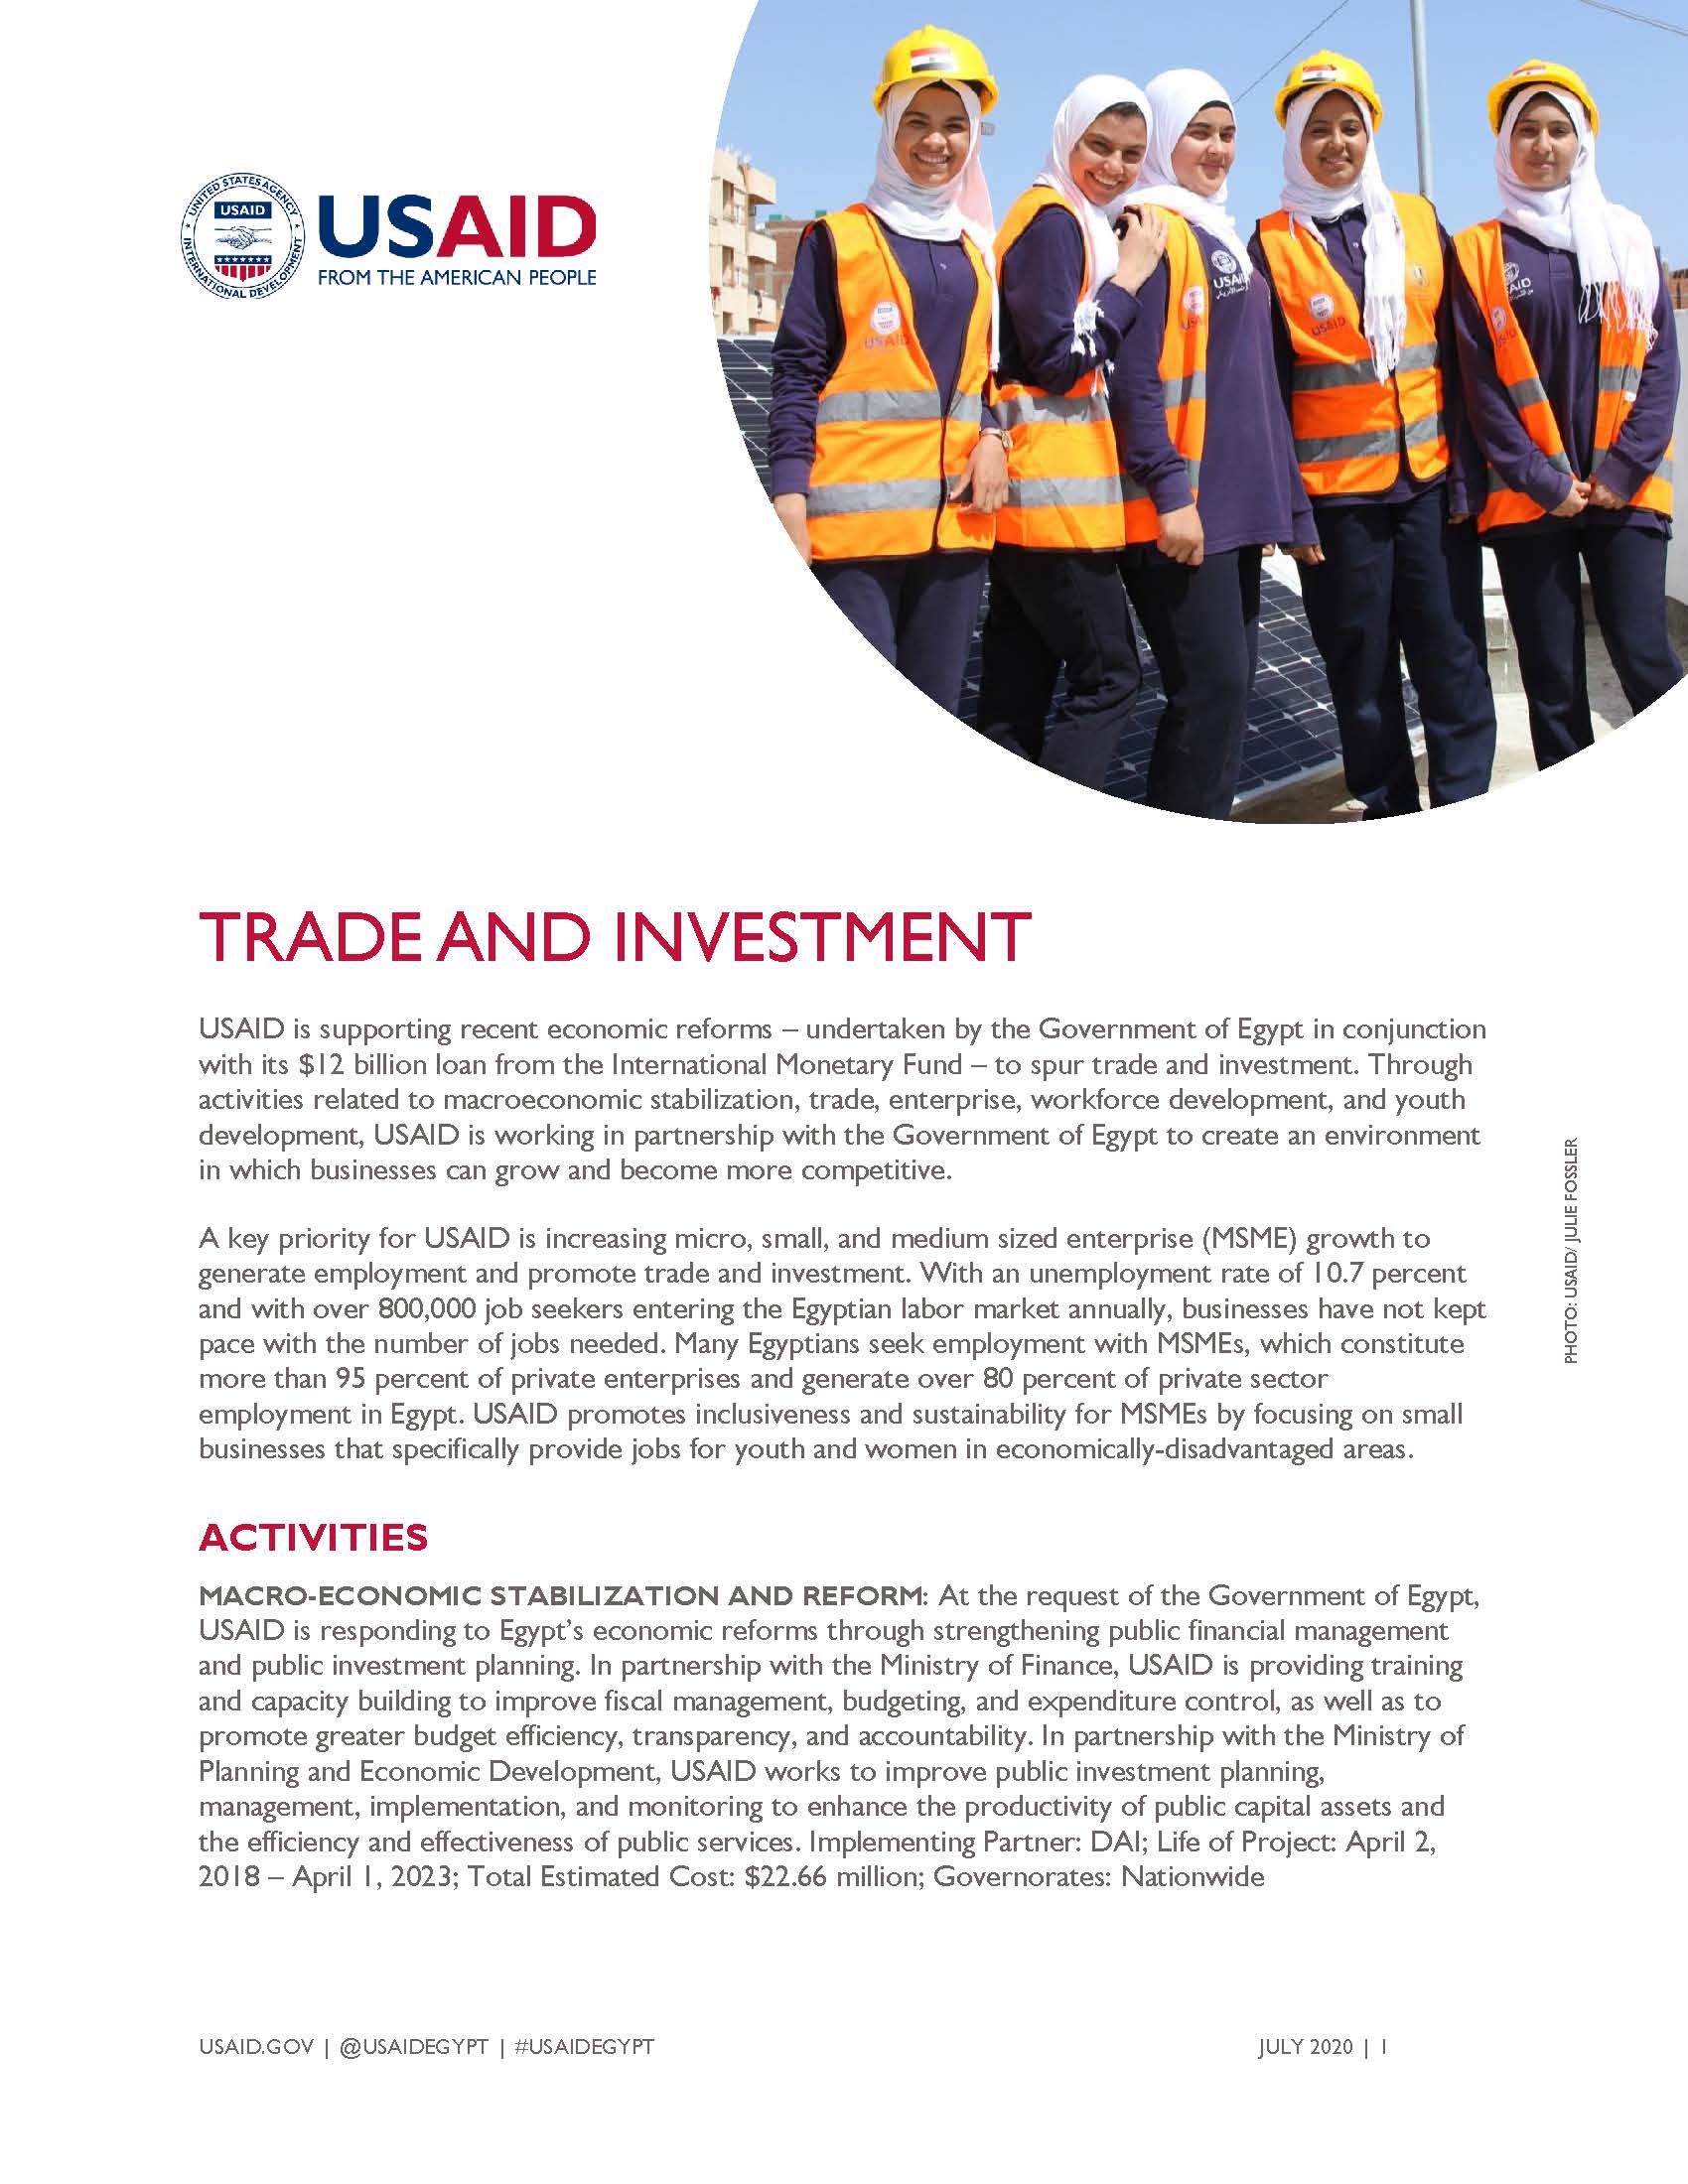 USAID/Egypt Fact Sheet: Trade and Investment